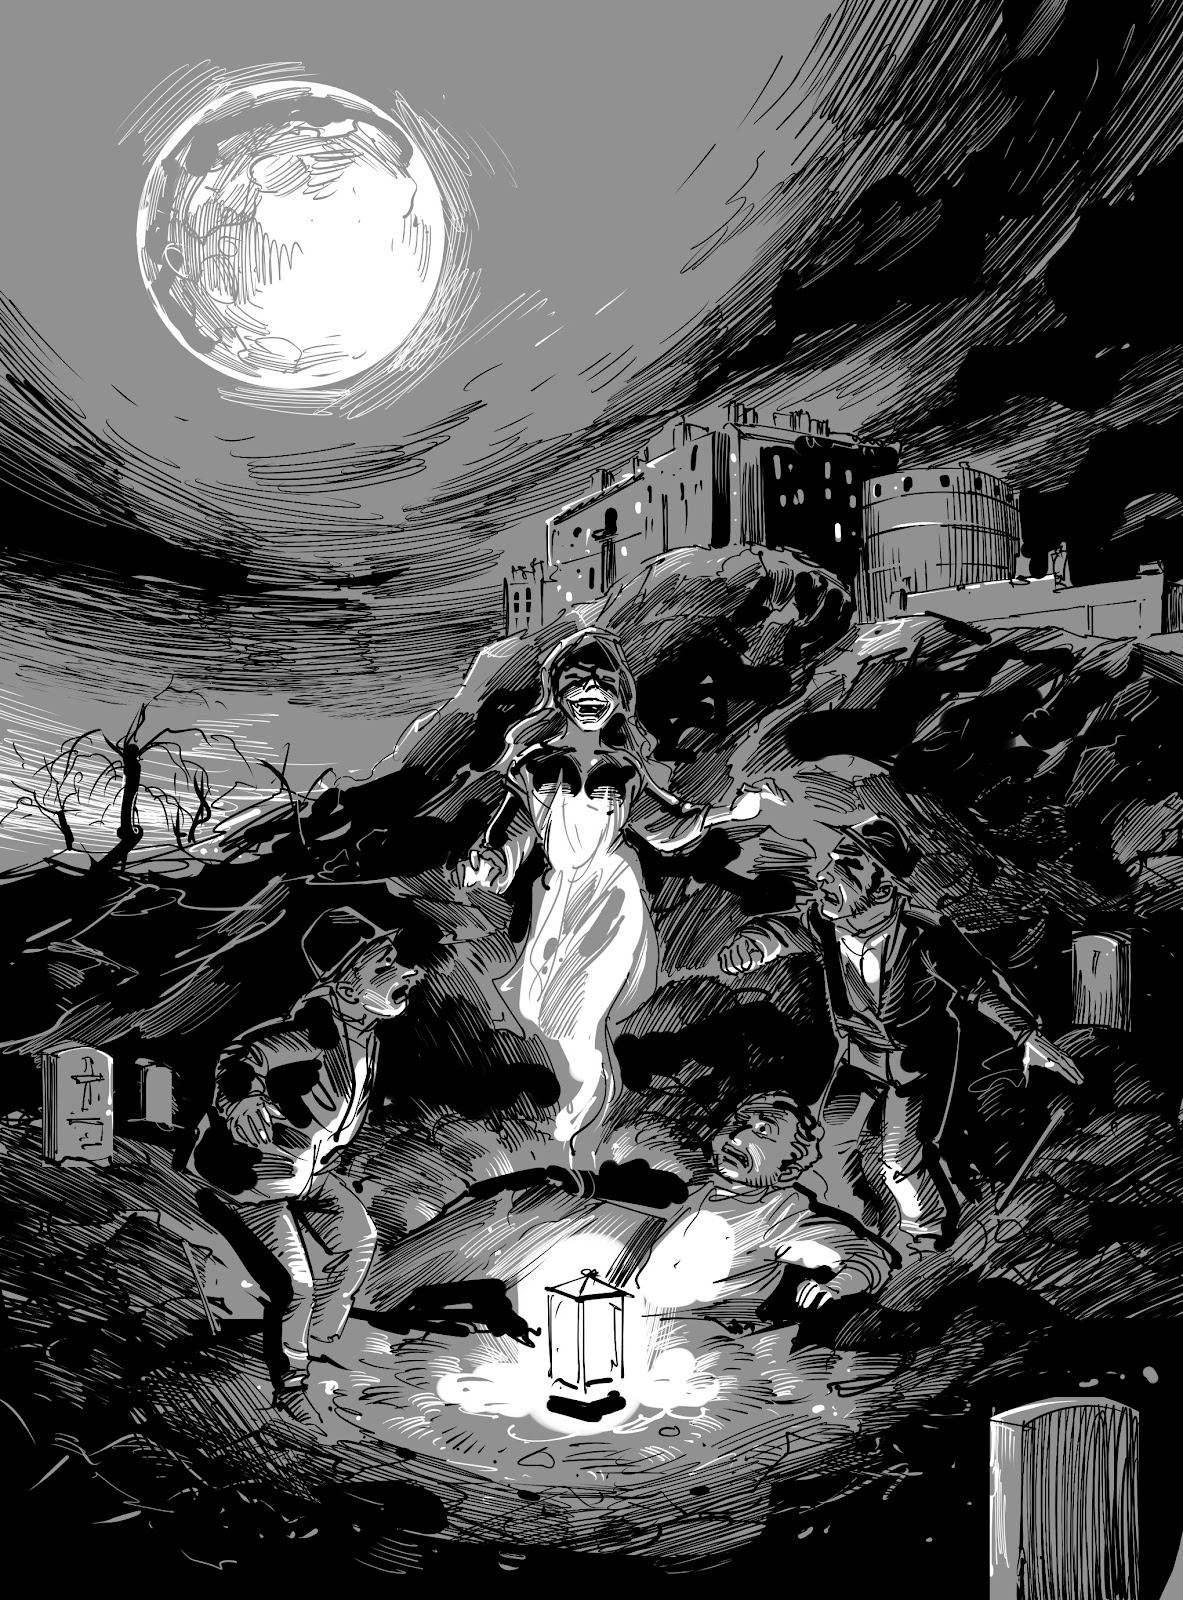 banshee in moon lit night black and white comics style illustration